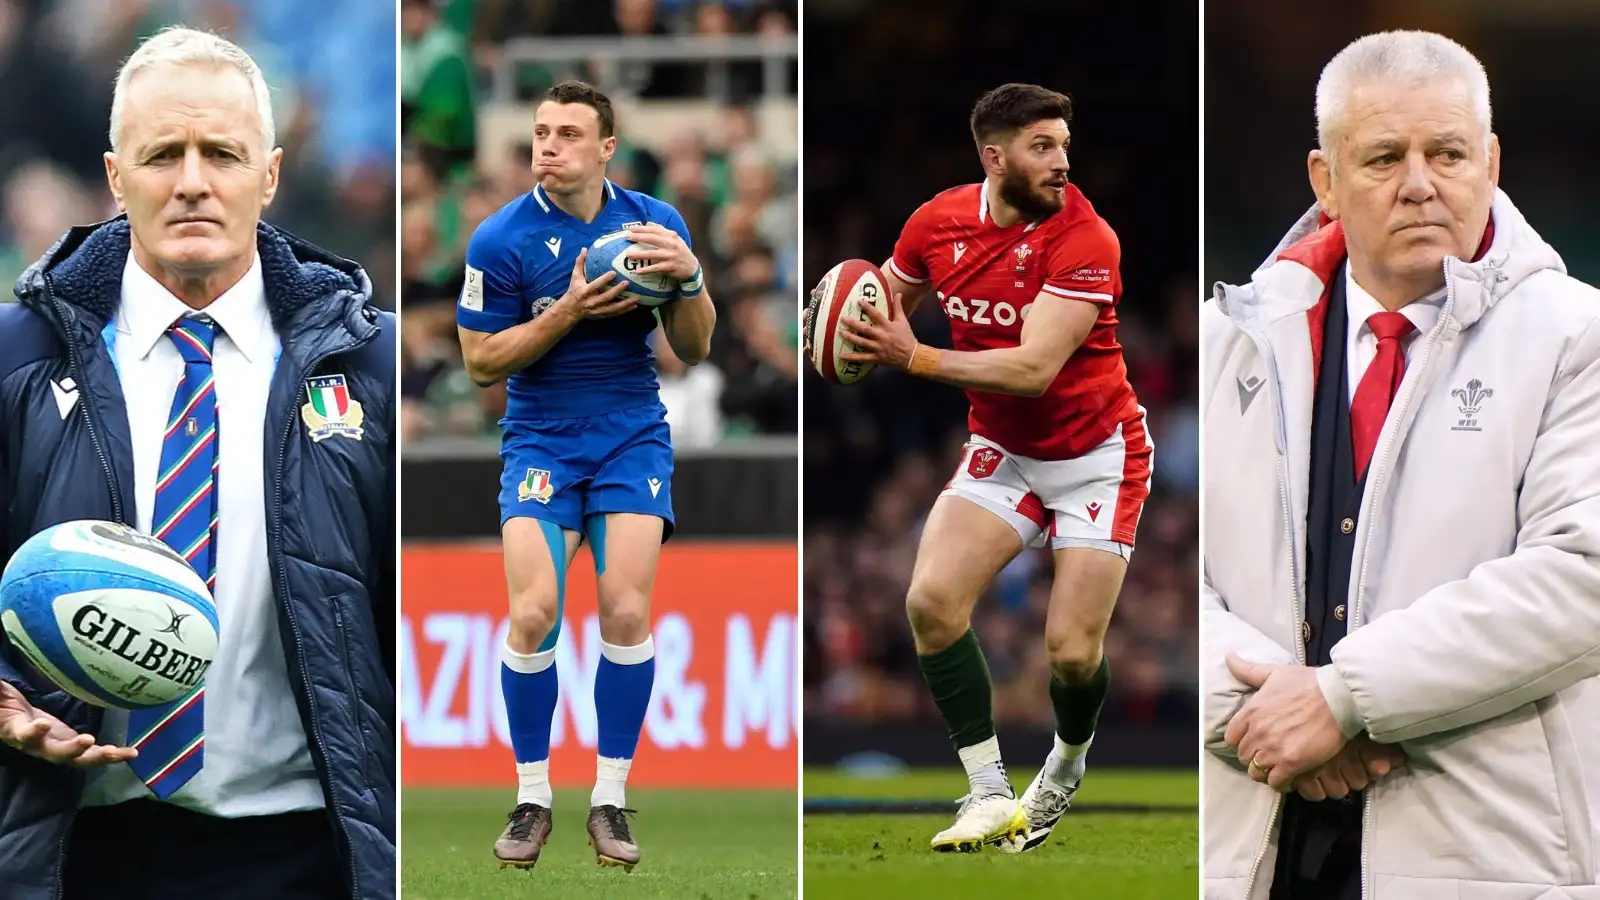 The 2023 Six Nations Wooden Spoon winners could be decided this weekend as Wales head to Rome in search of their first victory since Warren Gatland returned to the helm and take on an Italy team that defeated them last year.